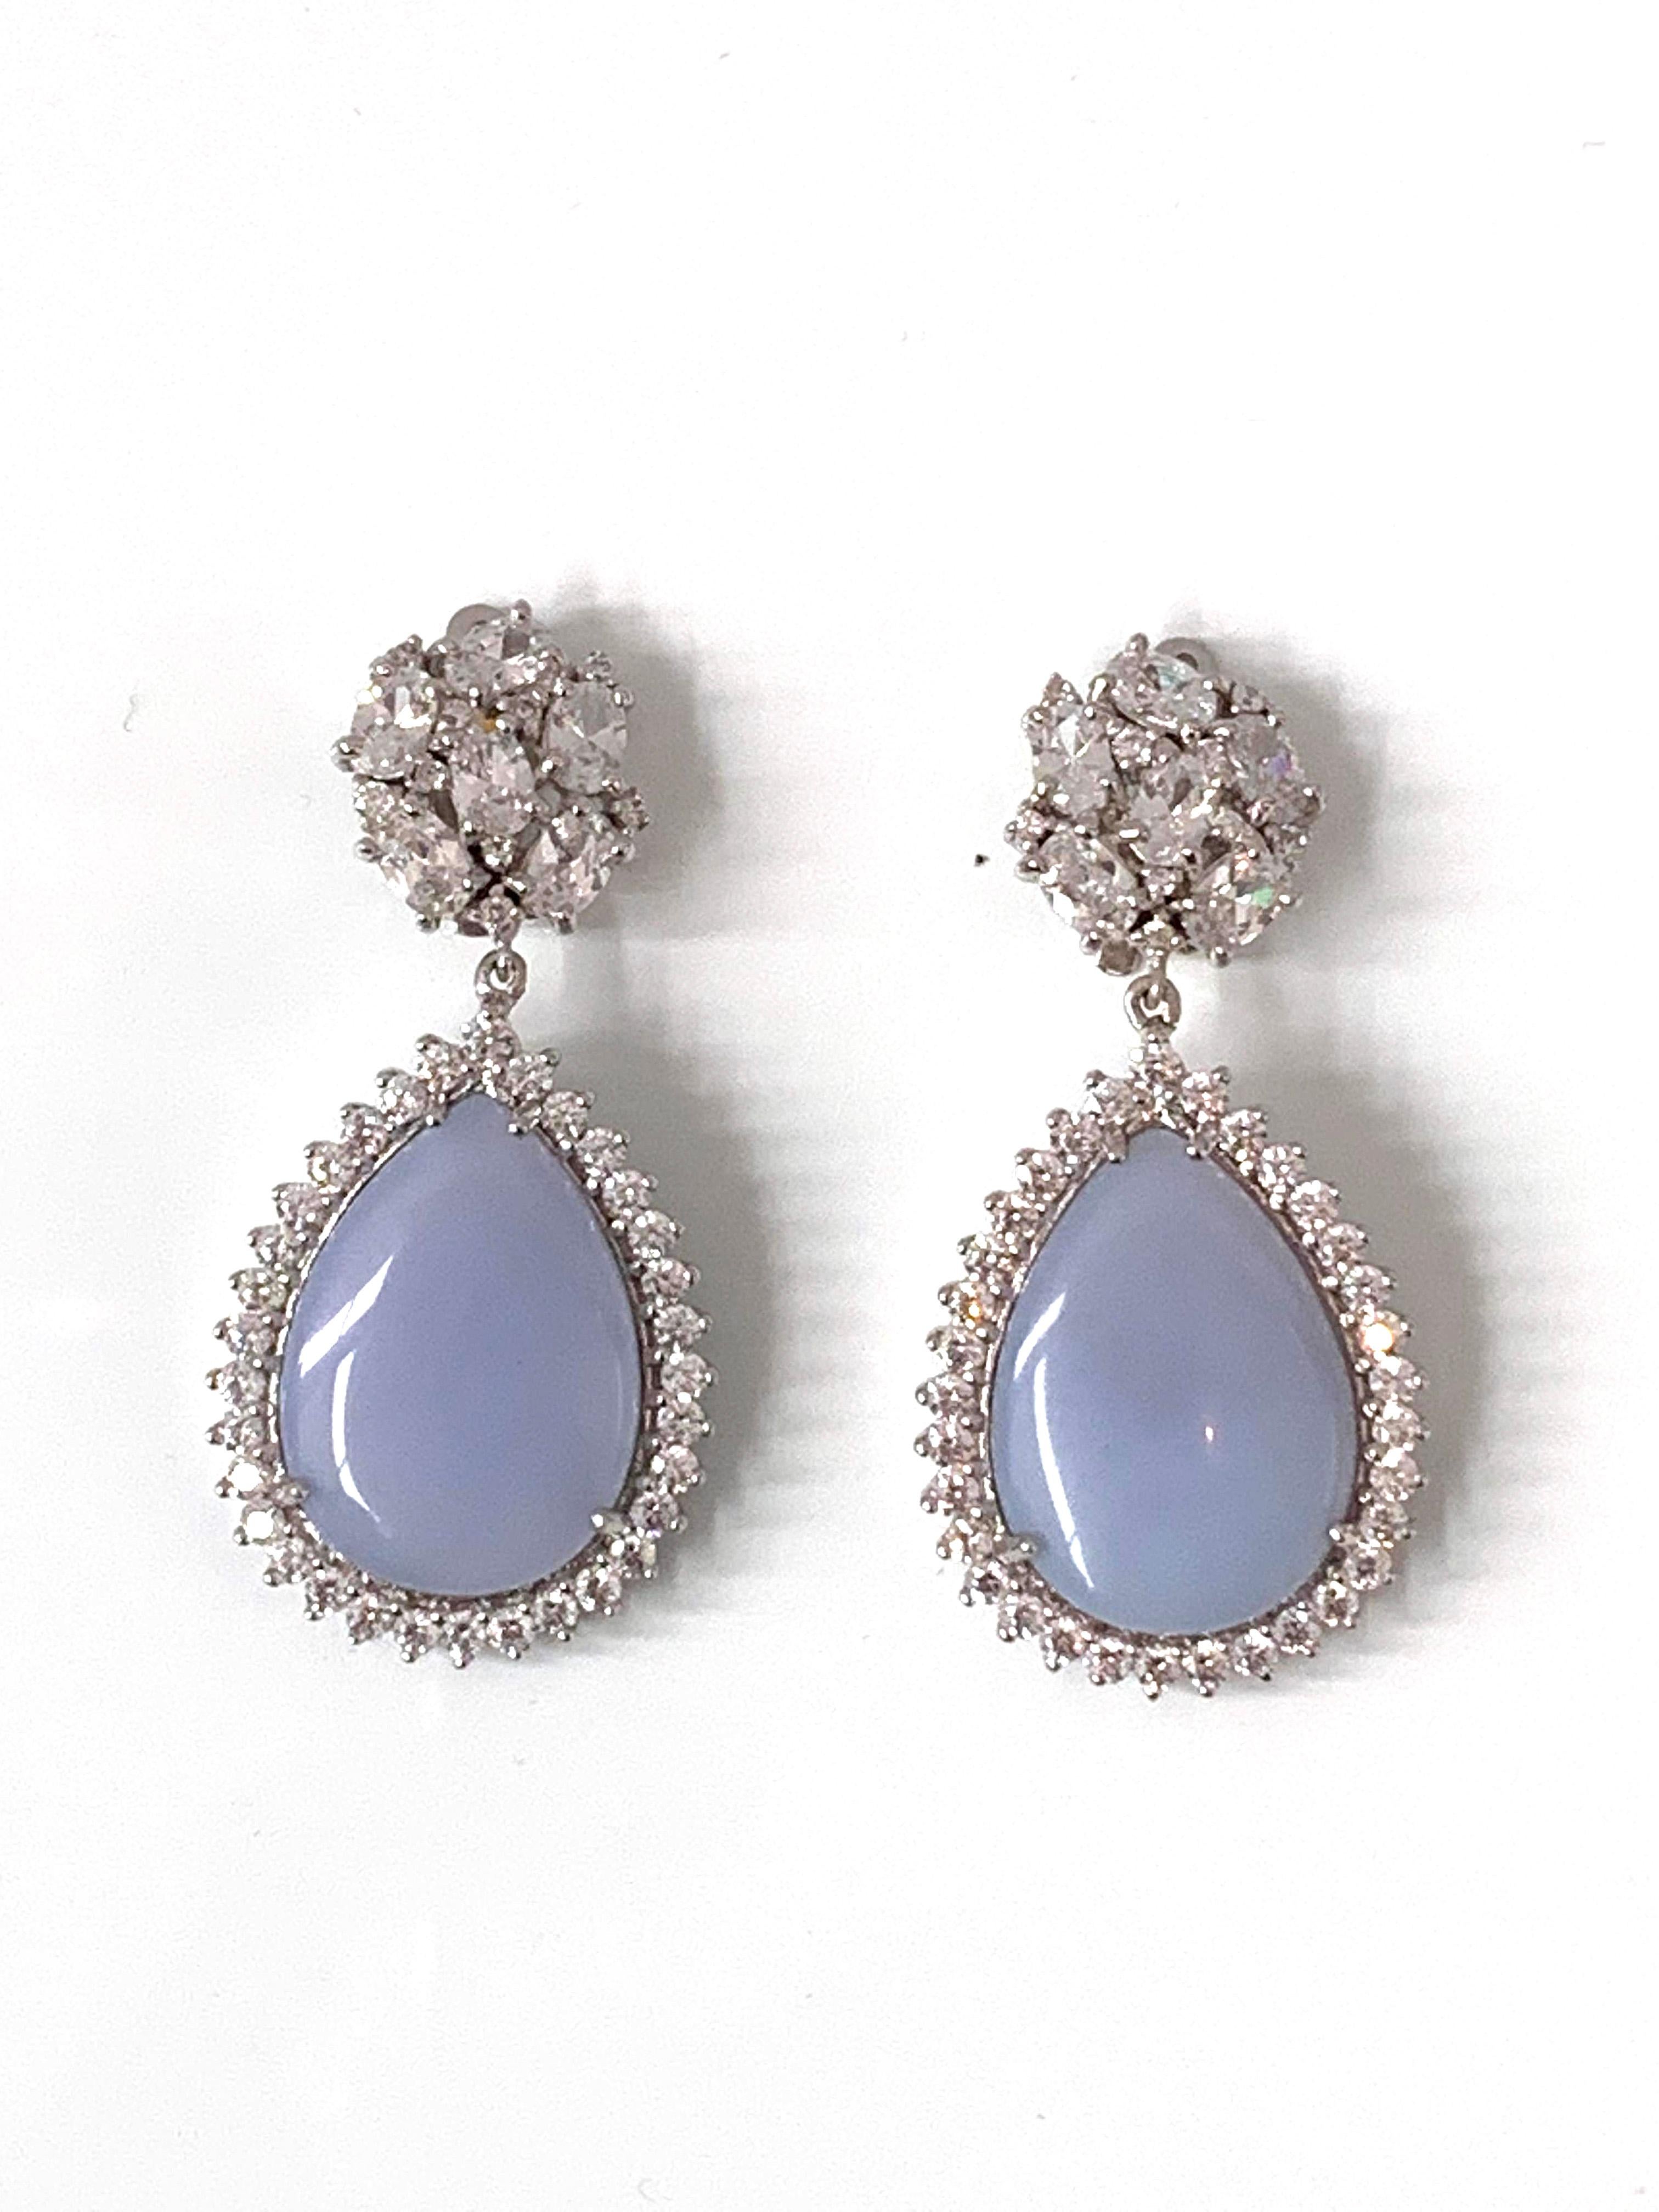 Encrusted faux diamond top and pear shape chalcedony drop earrings surrounded with faux diamond CZ. These earrings feature 2 beautiful iridescent cabochon-cut pear shape chalcedony and over 100pc of round and oval cubic zirconia, handset in platinum